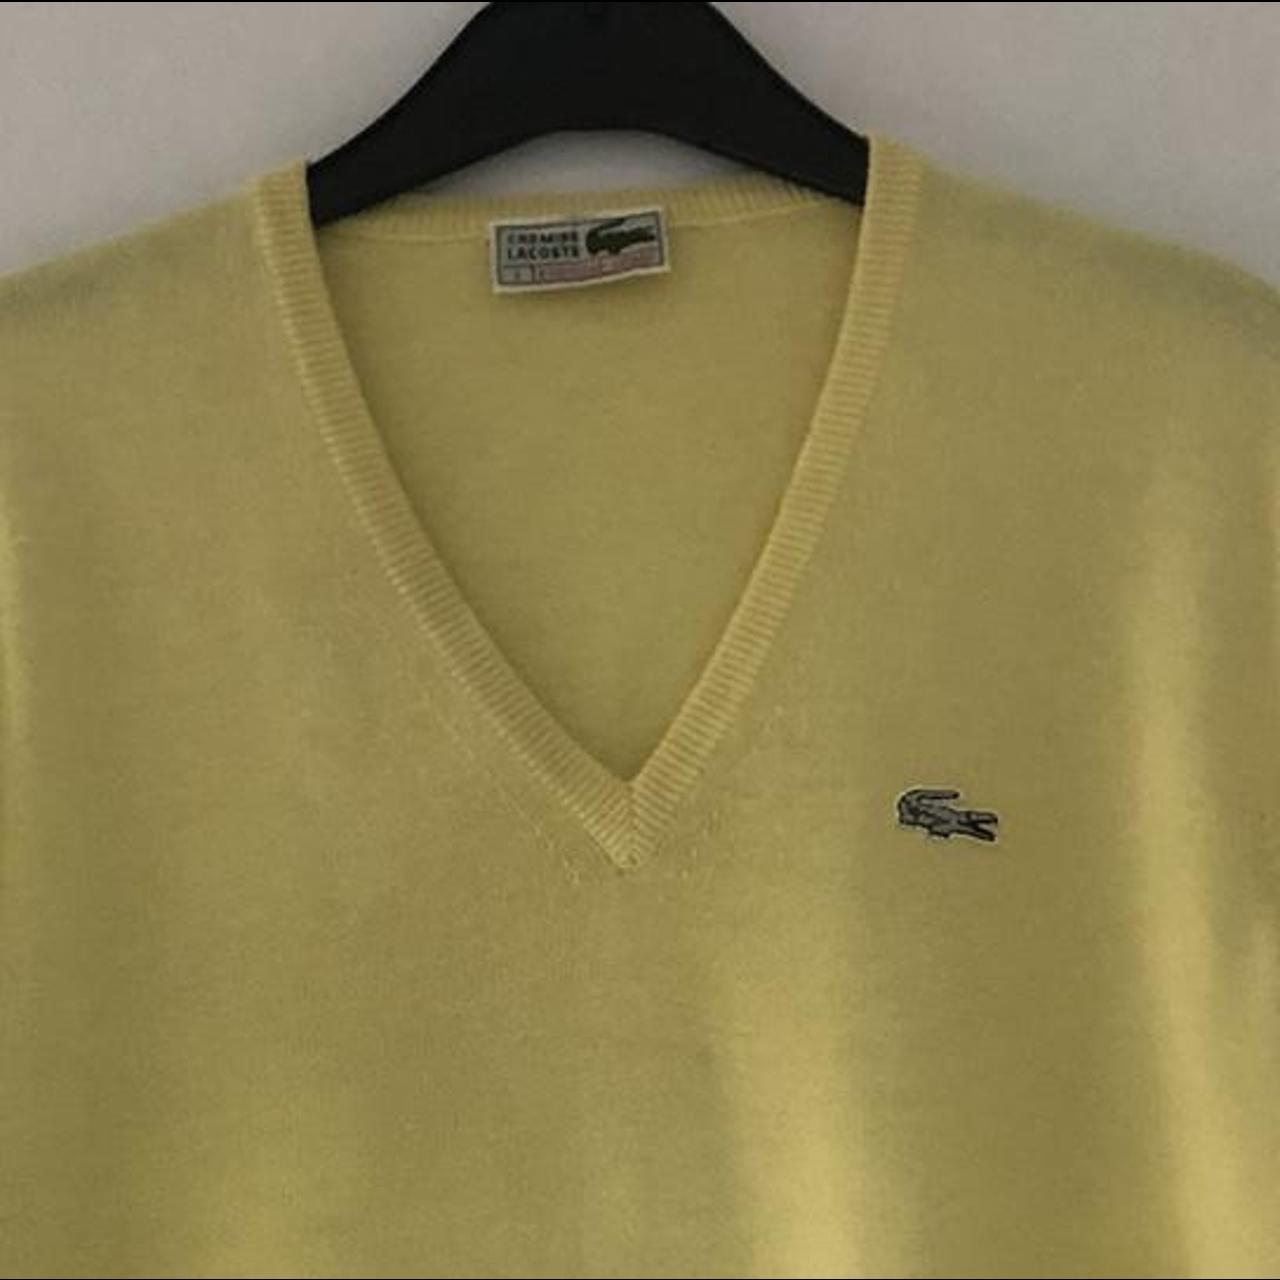 Lacoste vintage V neck yellow jumper / sweater with... - Depop